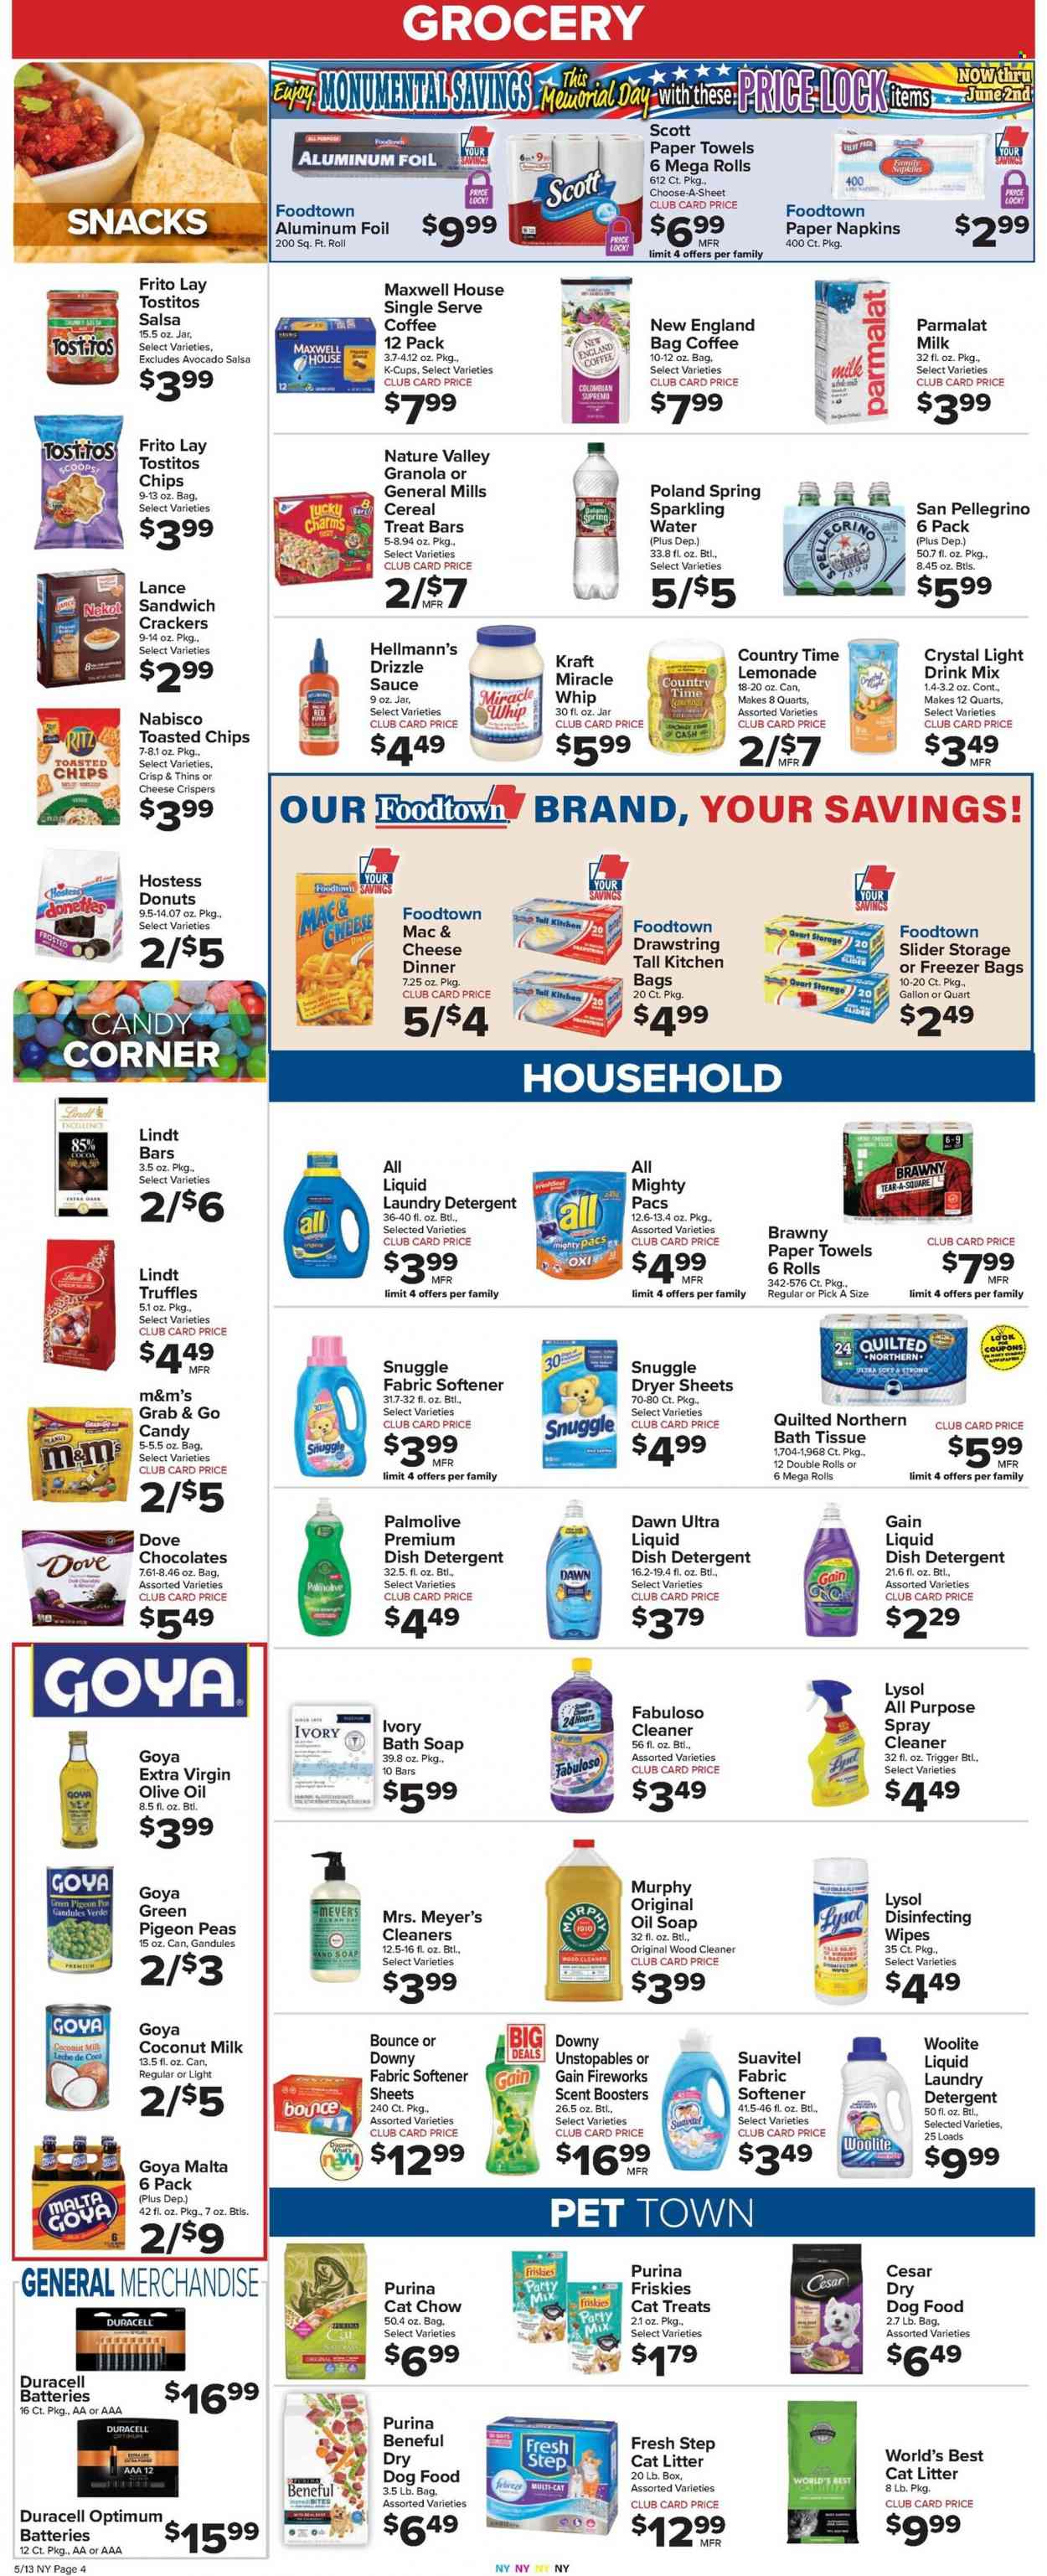 thumbnail - Foodtown Flyer - 05/13/2022 - 05/19/2022 - Sales products - donut, peas, sauce, Kraft®, Parmalat, Miracle Whip, Hellmann’s, chocolate, snack, Lindt, truffles, M&M's, crackers, RITZ, chips, Thins, Tostitos, coconut milk, Goya, cereals, granola, Nature Valley, toor dal, salsa, extra virgin olive oil, olive oil, lemonade, Country Time, sparkling water, San Pellegrino, Maxwell House, coffee, coffee capsules, K-Cups, wipes, napkins, Dove, bath tissue, Scott, Quilted Northern, kitchen towels, paper towels, detergent, Febreze, Gain, cleaner, Lysol, Woolite, Fabuloso, Snuggle, Unstopables, fabric softener, laundry detergent, dryer sheets, scent booster, Gain Fireworks, Downy Laundry, hand soap, Palmolive, soap, Pigeon, aluminium foil, freezer bag, battery, Duracell, animal food, cat litter, dog food, Purina, Optimum, Friskies, Fresh Step. Page 4.